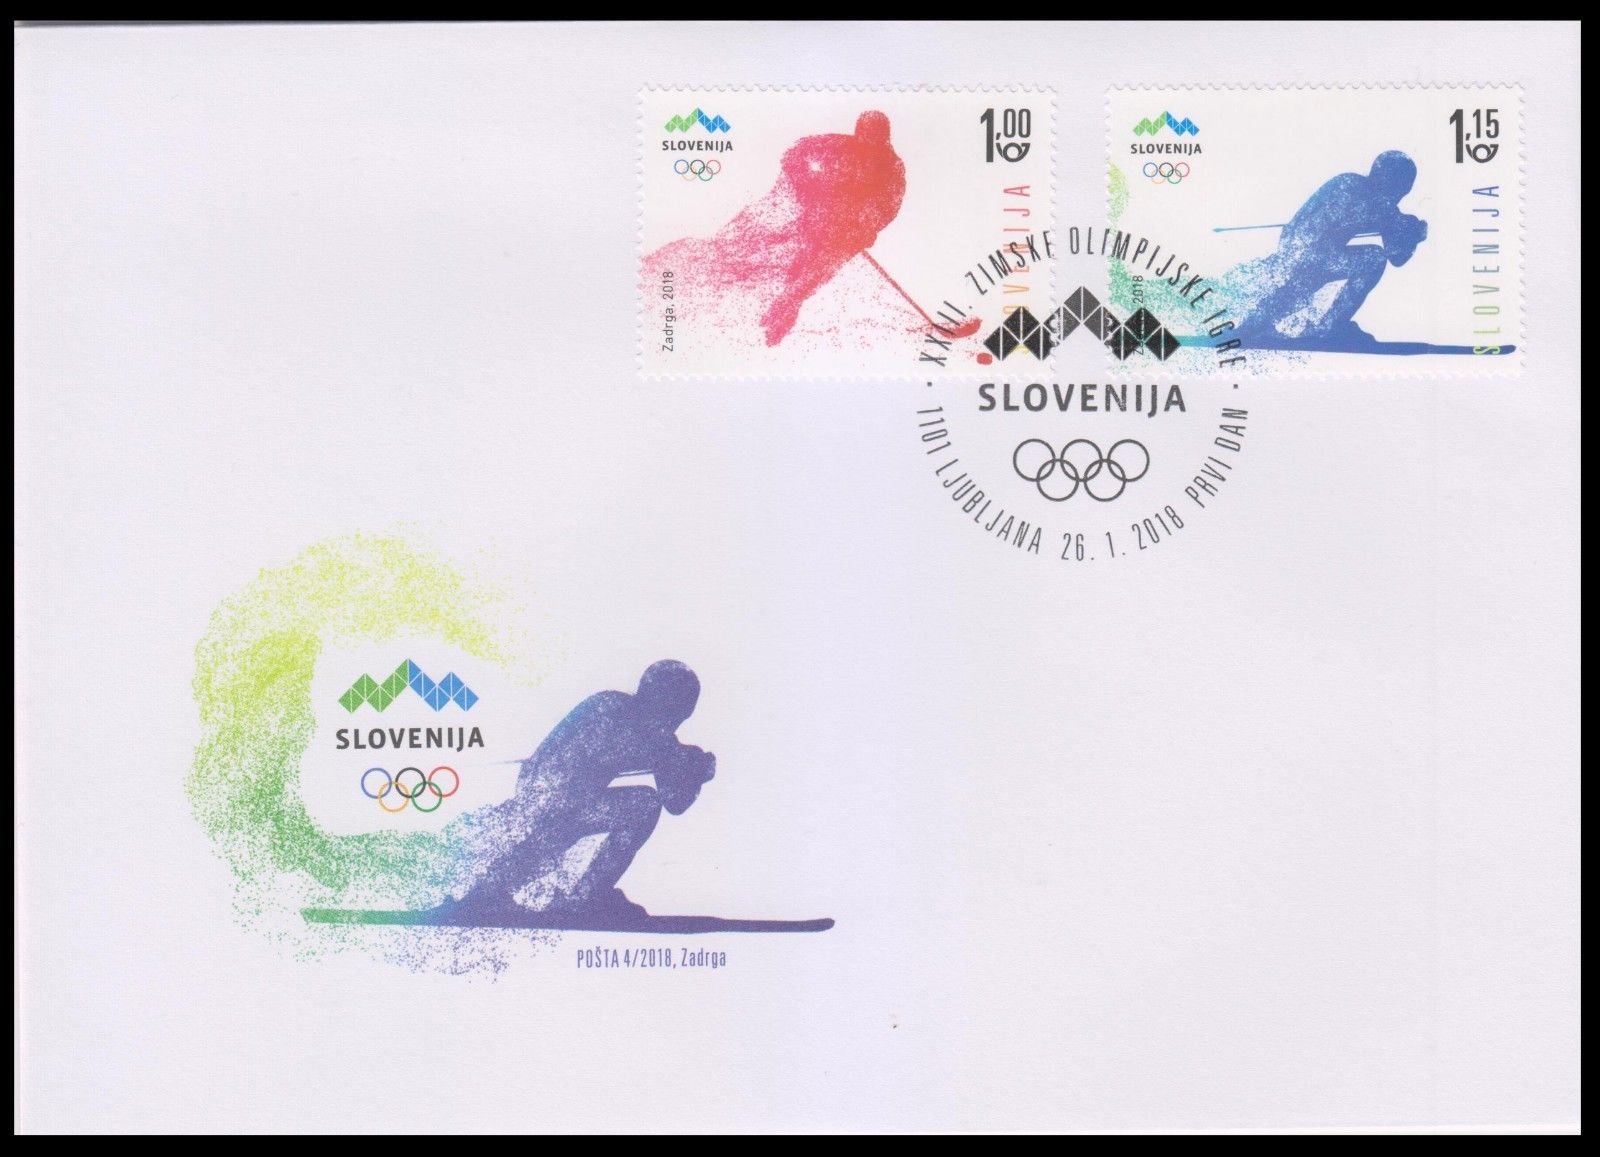 Slovenia - 2018 Winter Olympics, released January 26, 2018 [first day cover]